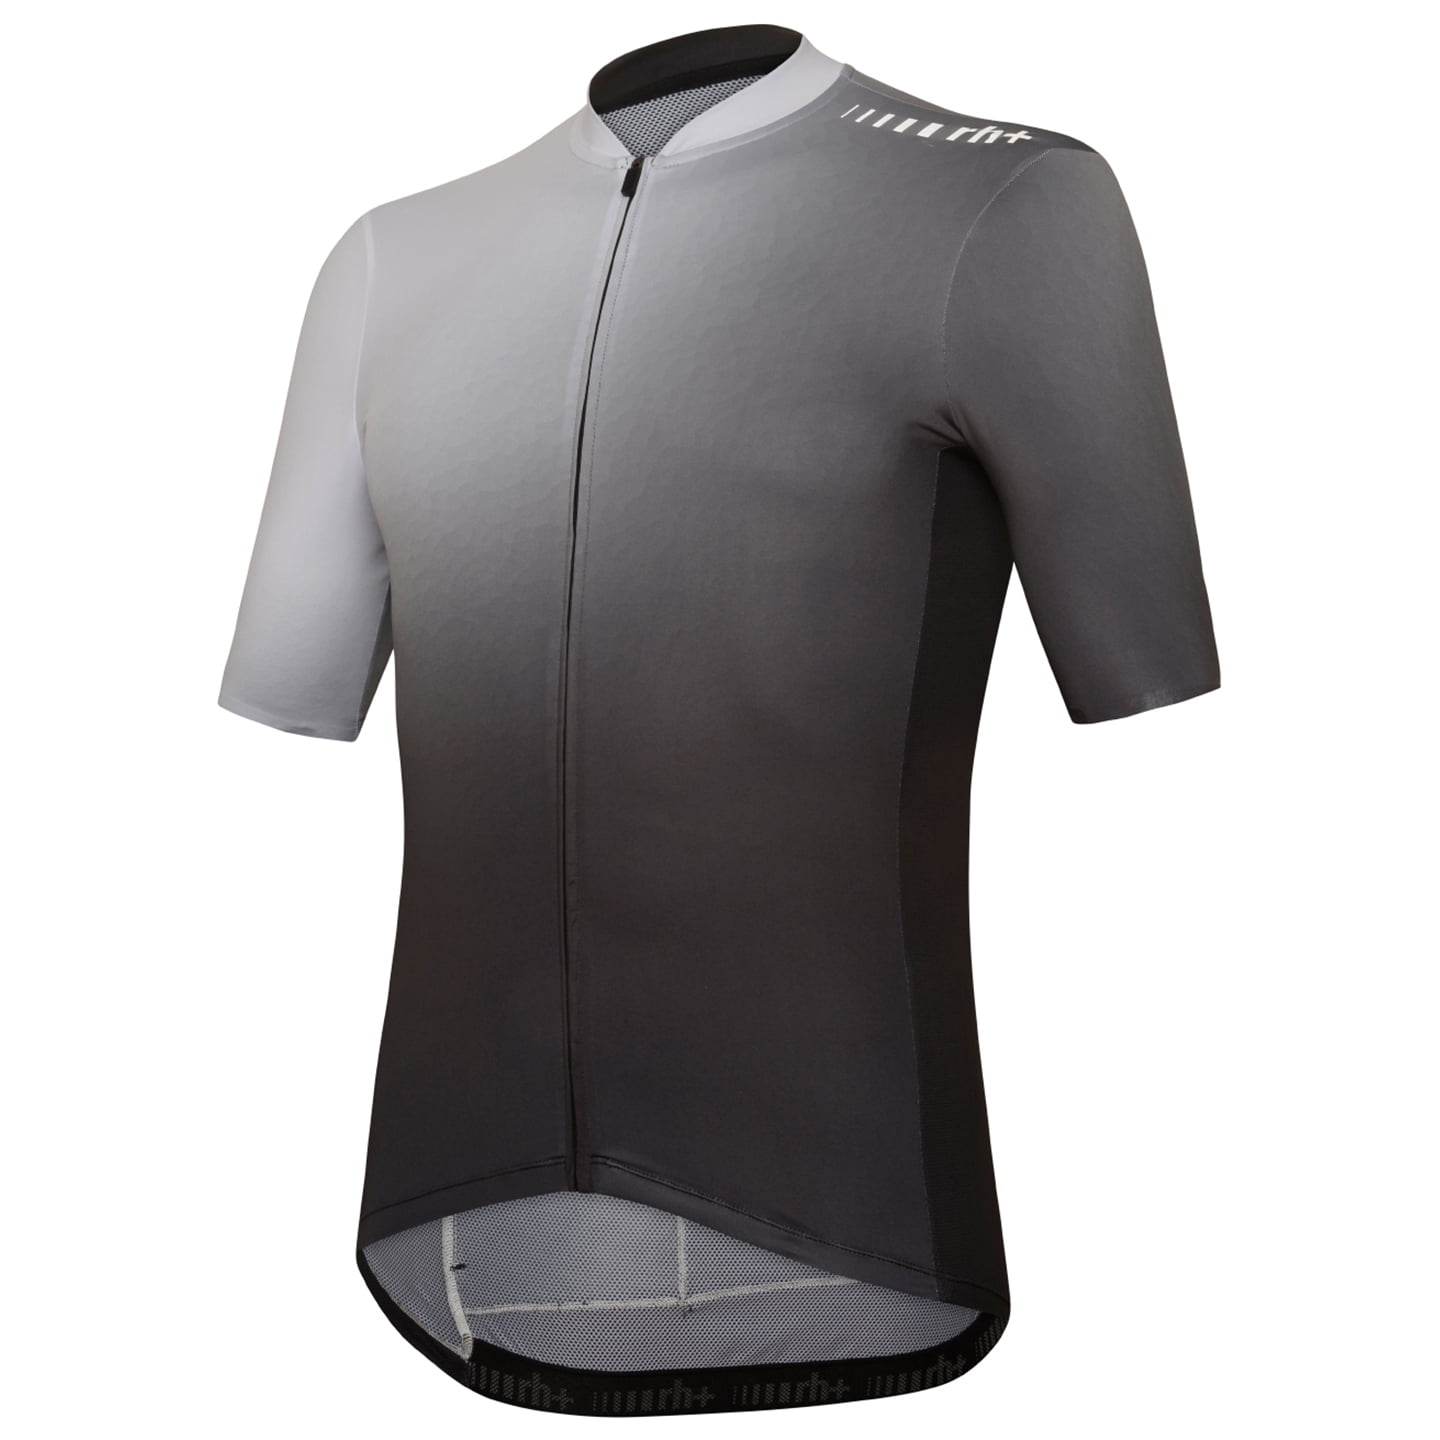 rh+ Magnus Short Sleeve Jersey Short Sleeve Jersey, for men, size 2XL, Cycling jersey, Cycle clothing